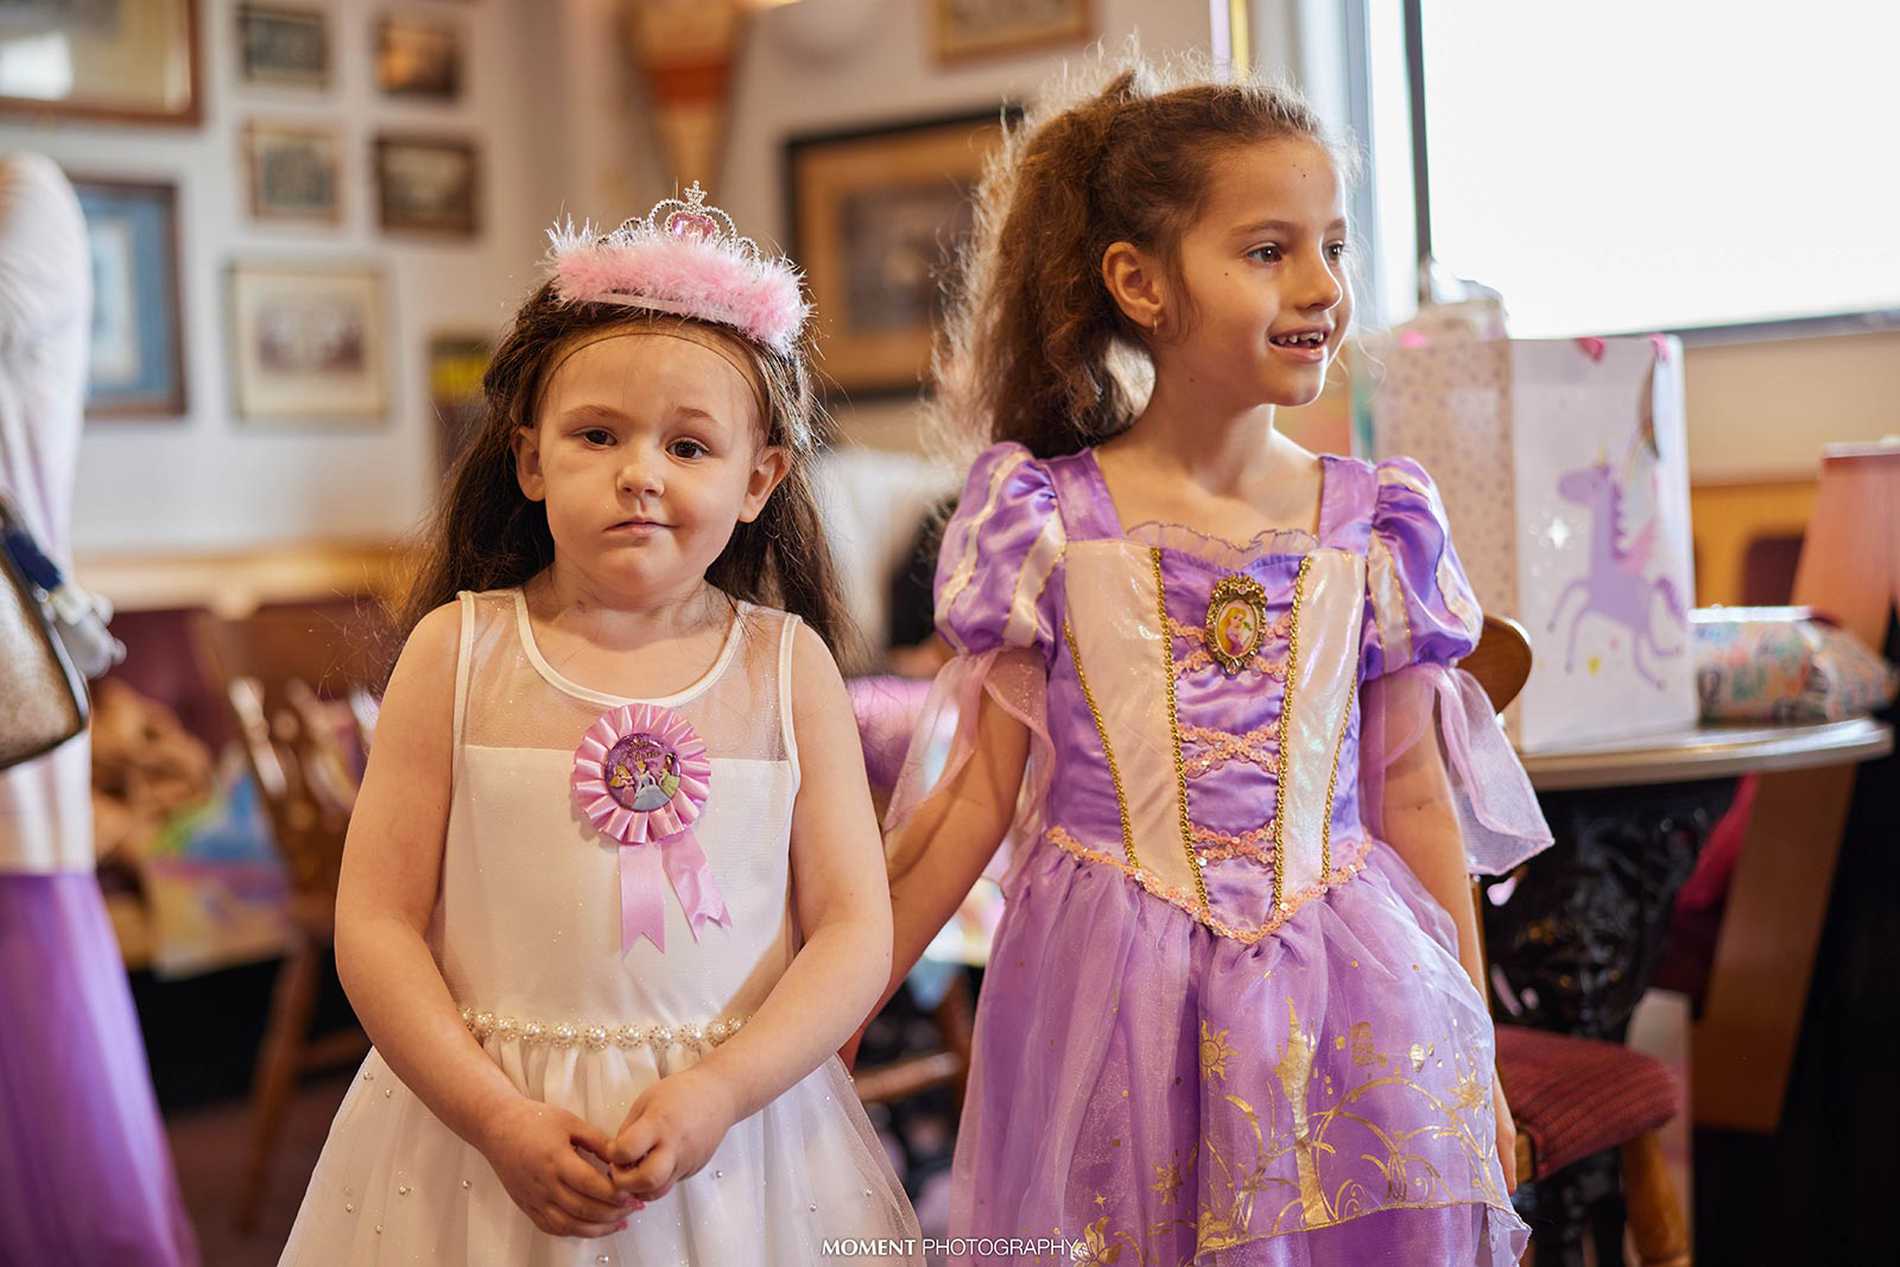 Wish child Ryleigh and her friend, dressed as princesses at her birthday party.